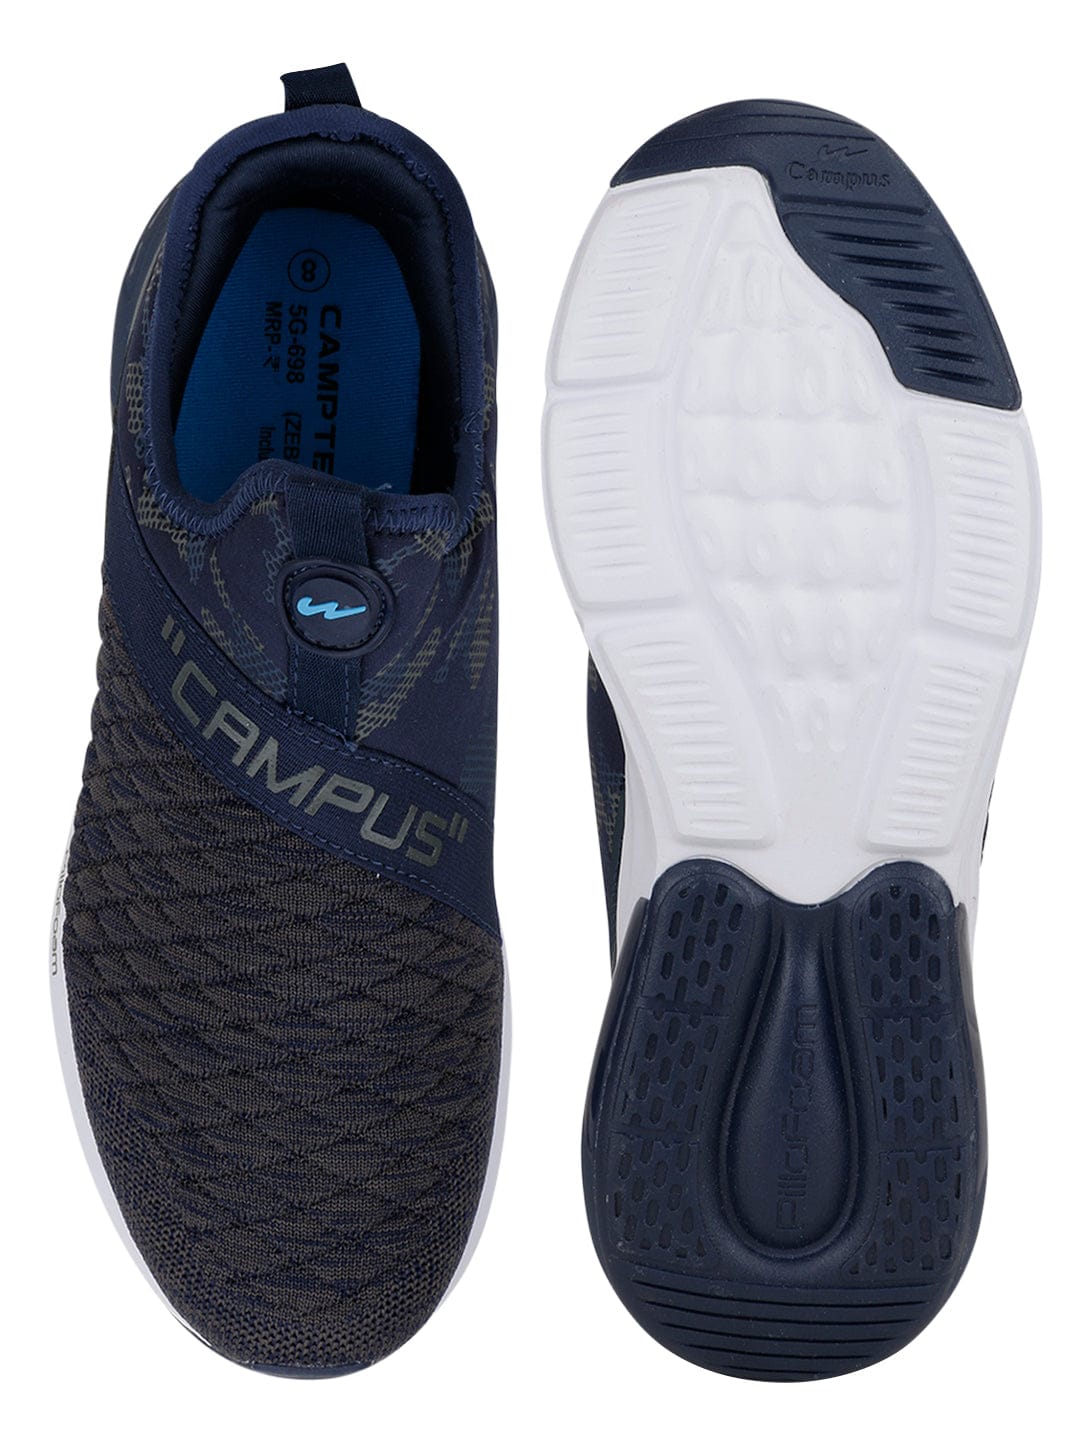 Buy Casual Shoes For Men: Zebra-Navy-Sky | Campus Shoes